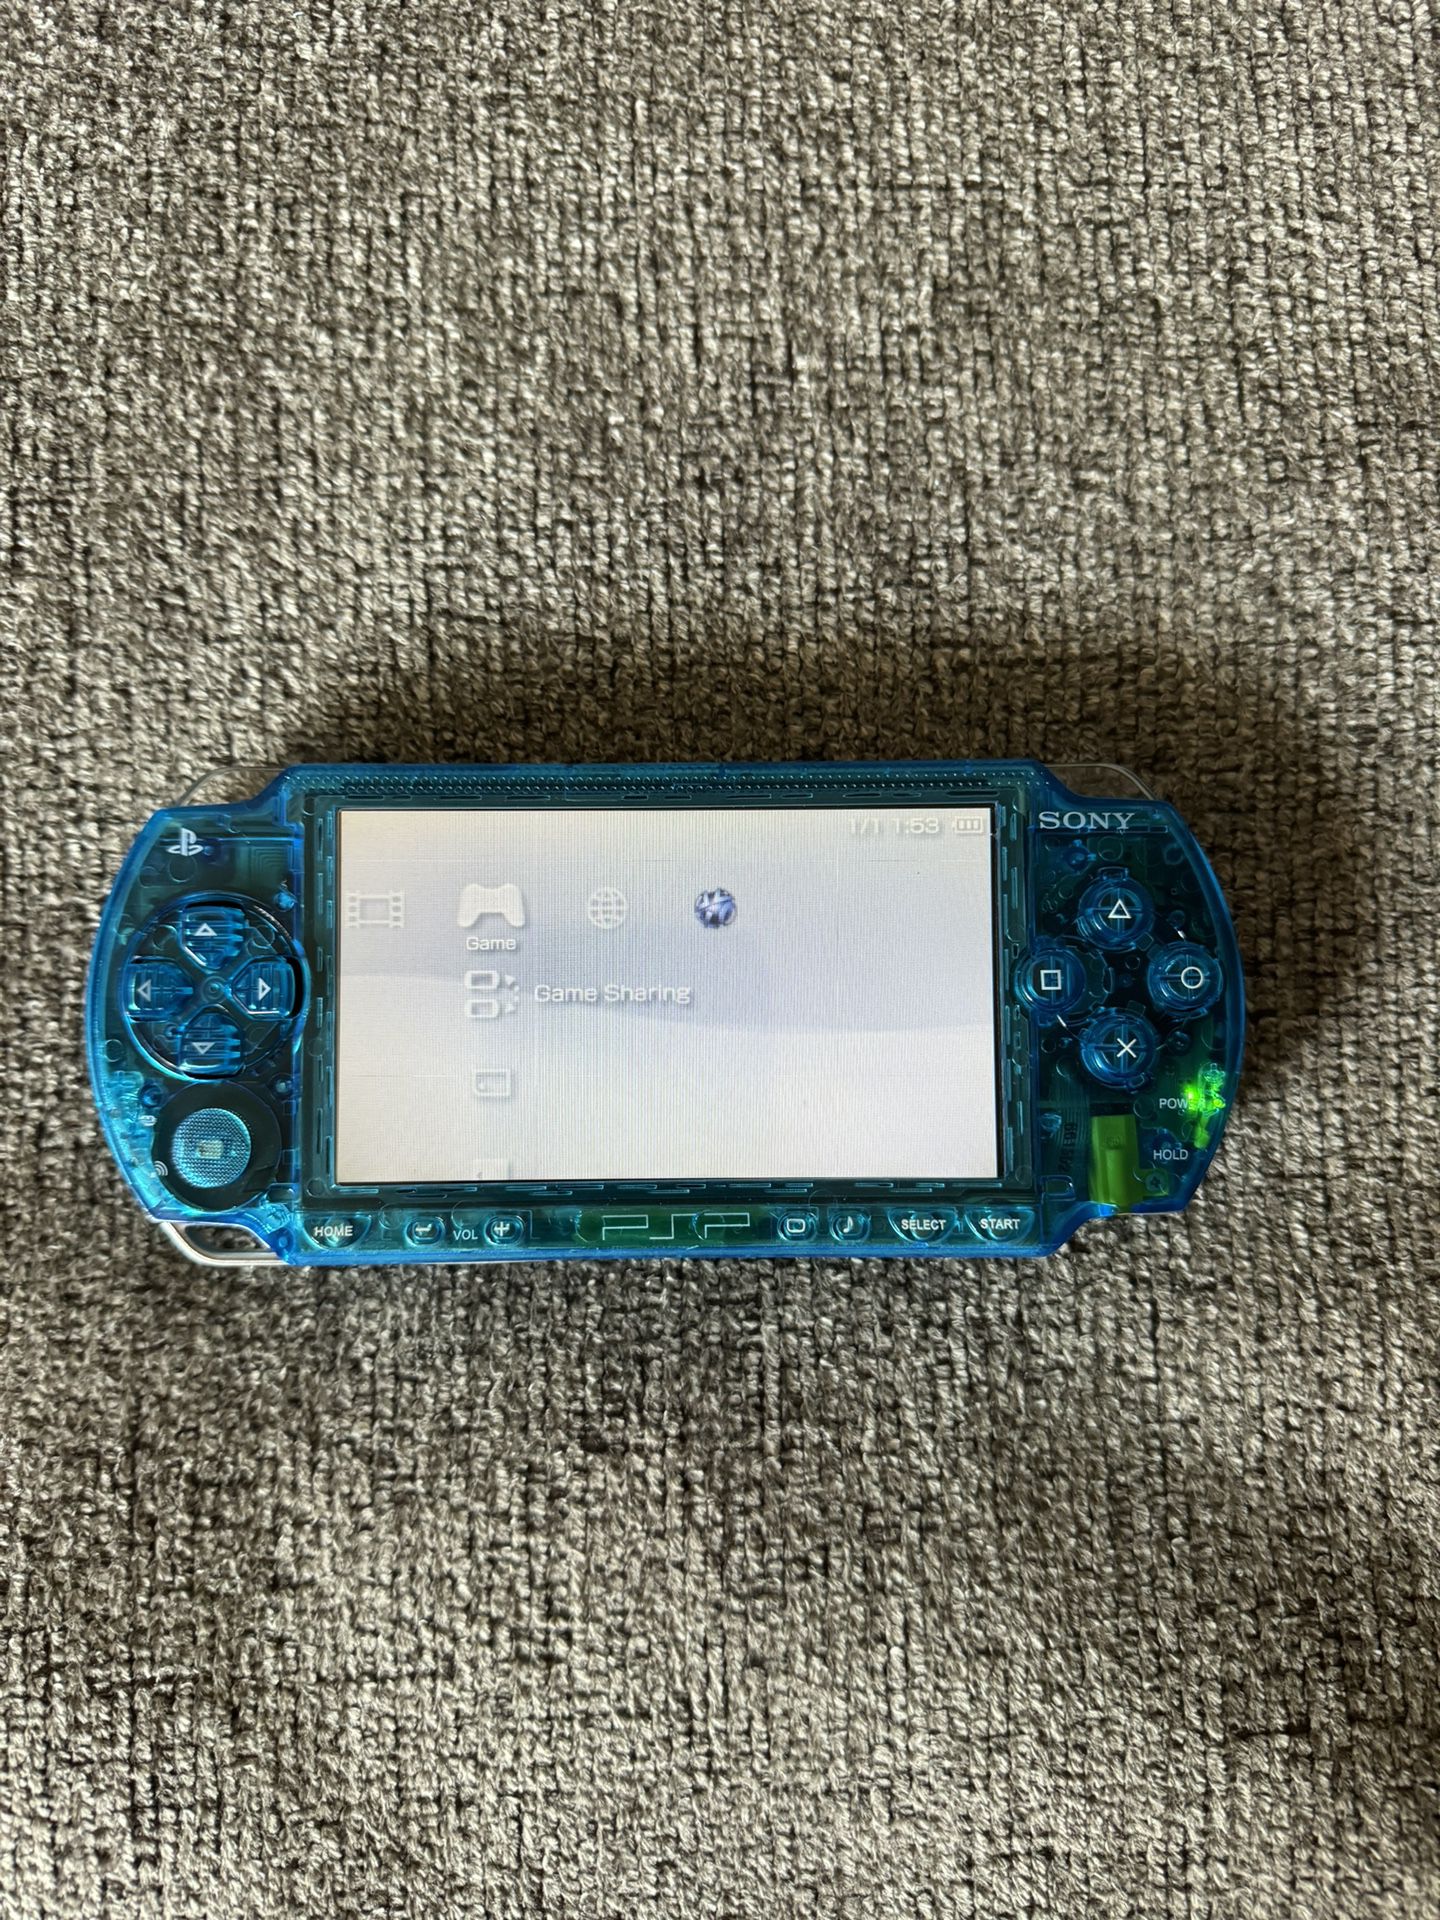 PSP 1000 With Over 2000 Games! 